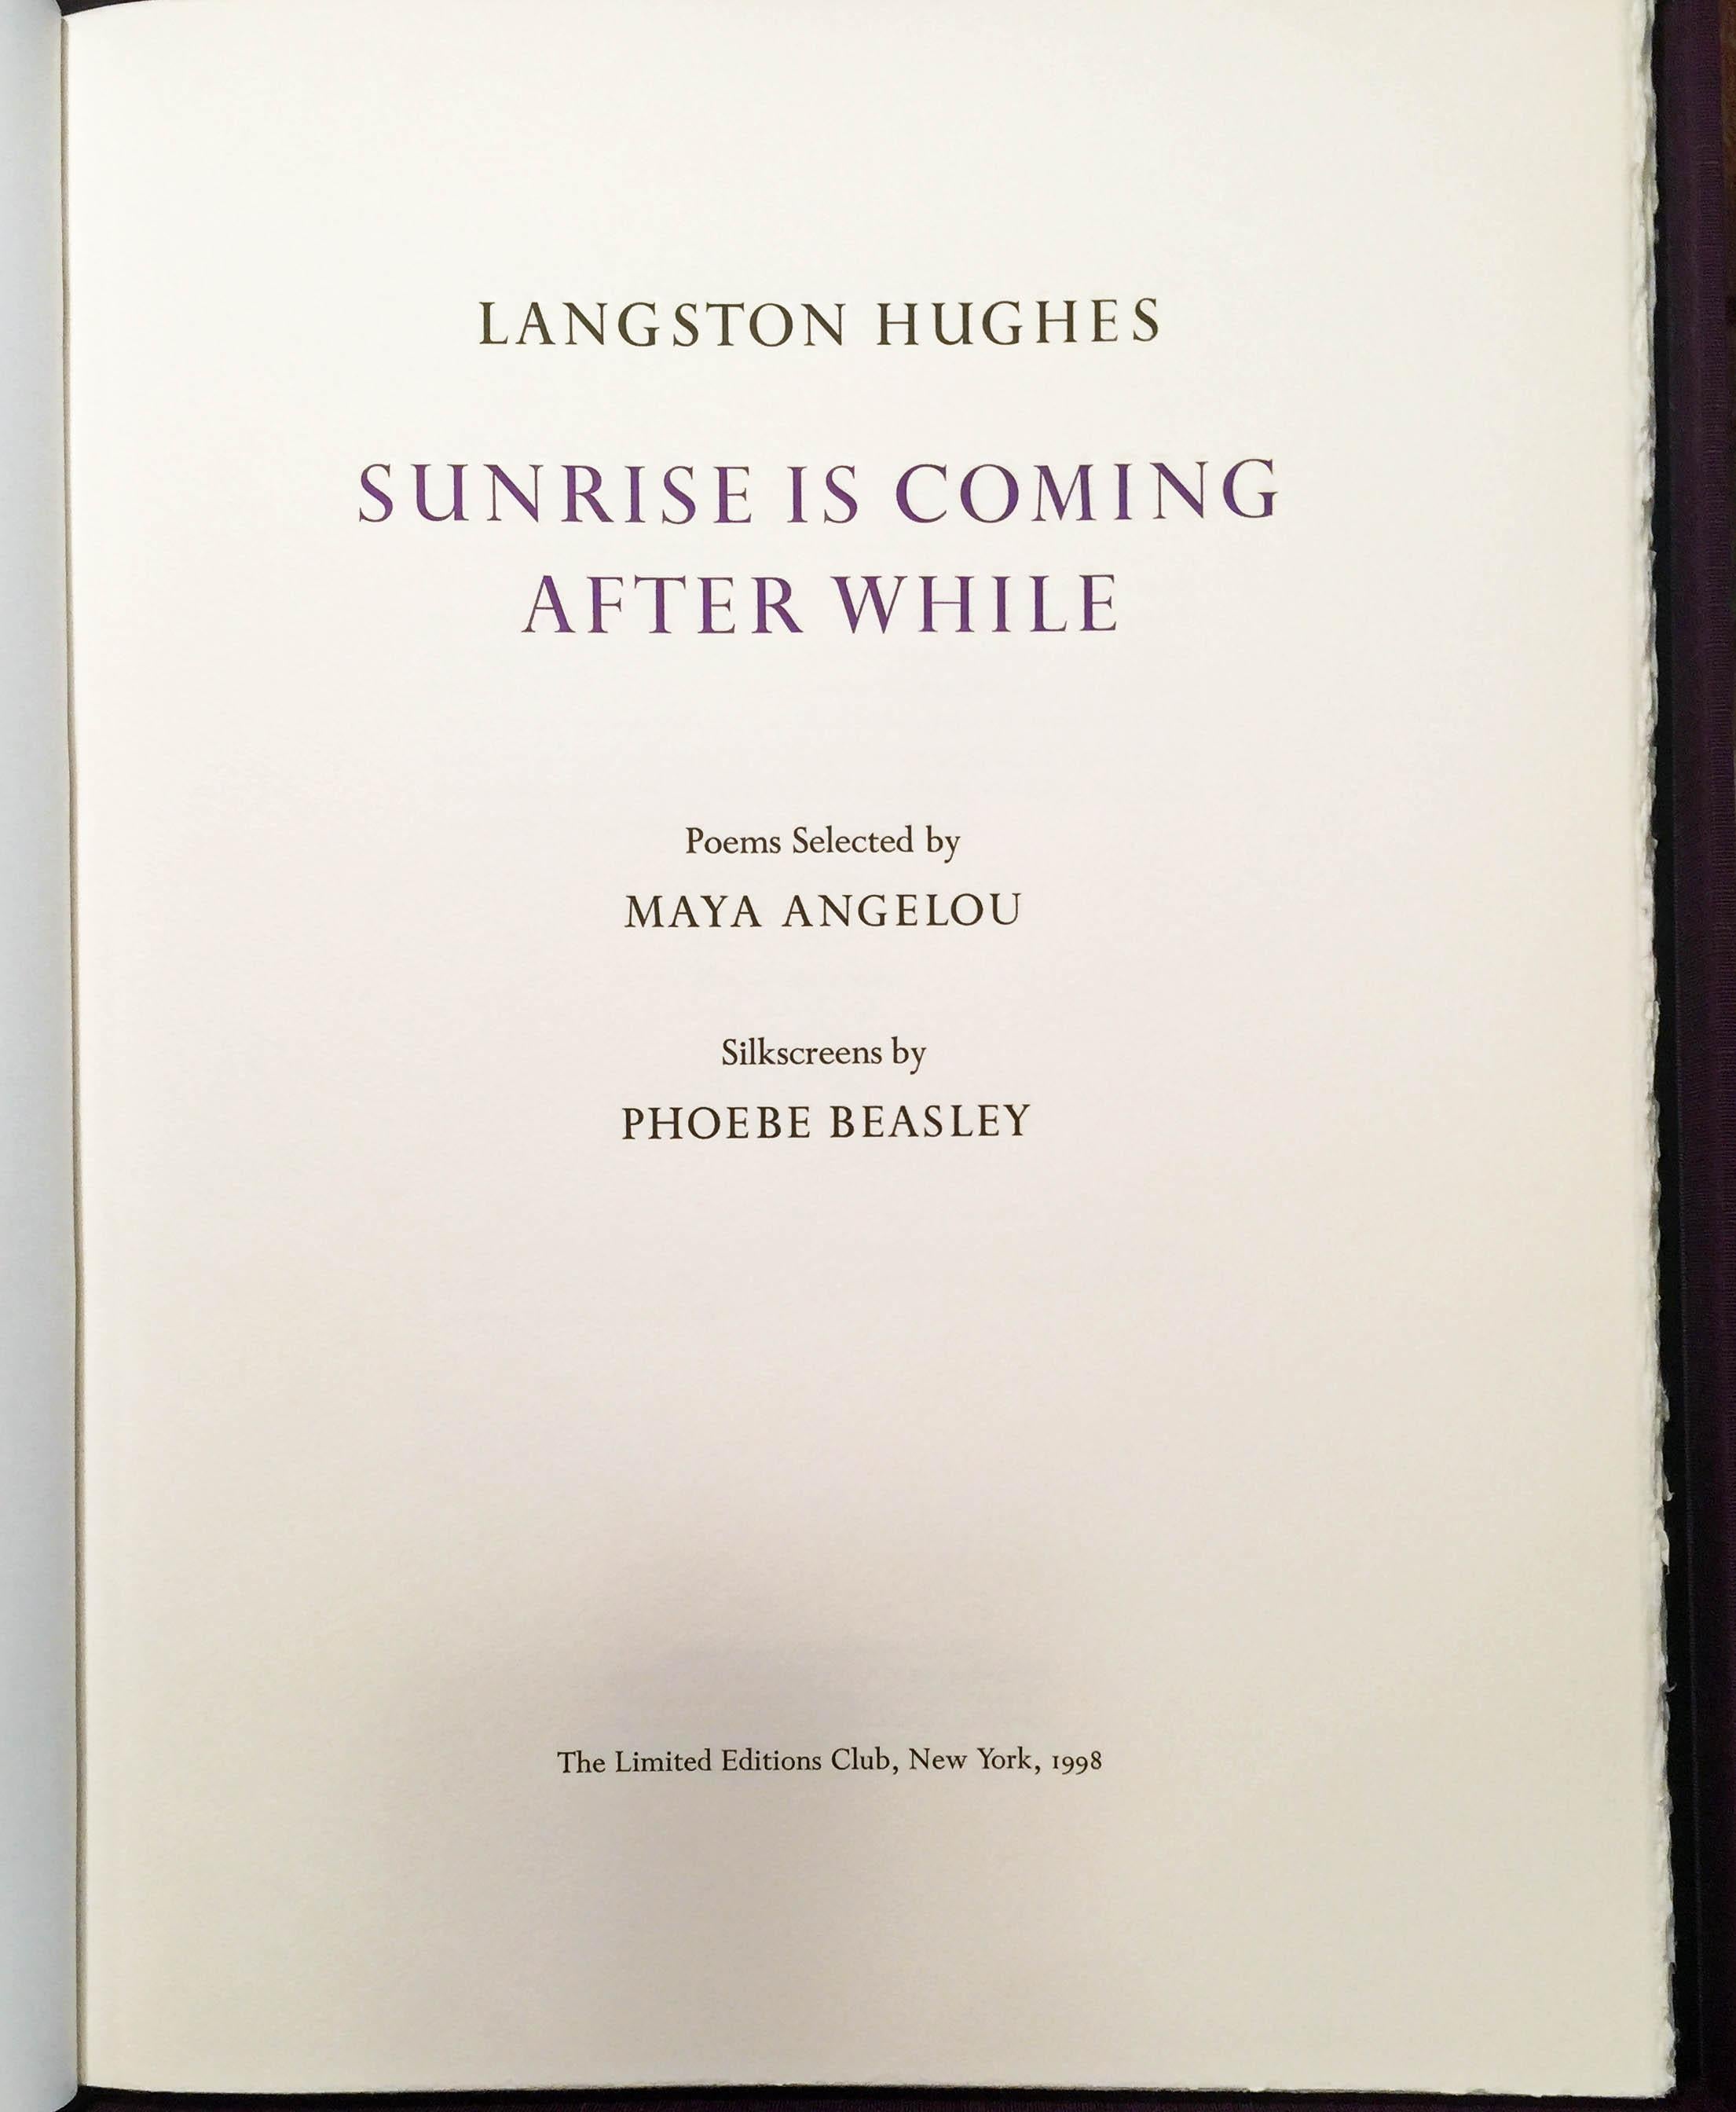 (Beasley, Phoebe)illus. SUNRISE IS COMING AFTER WHILE by Langston Hughes. Six of Hughes'poems selected by Maya Angelou, each illustrated with a screen print by Beasley. Limited Editions Club, NY, 1998. Number 5 of the edition of 300 copies. Folio,